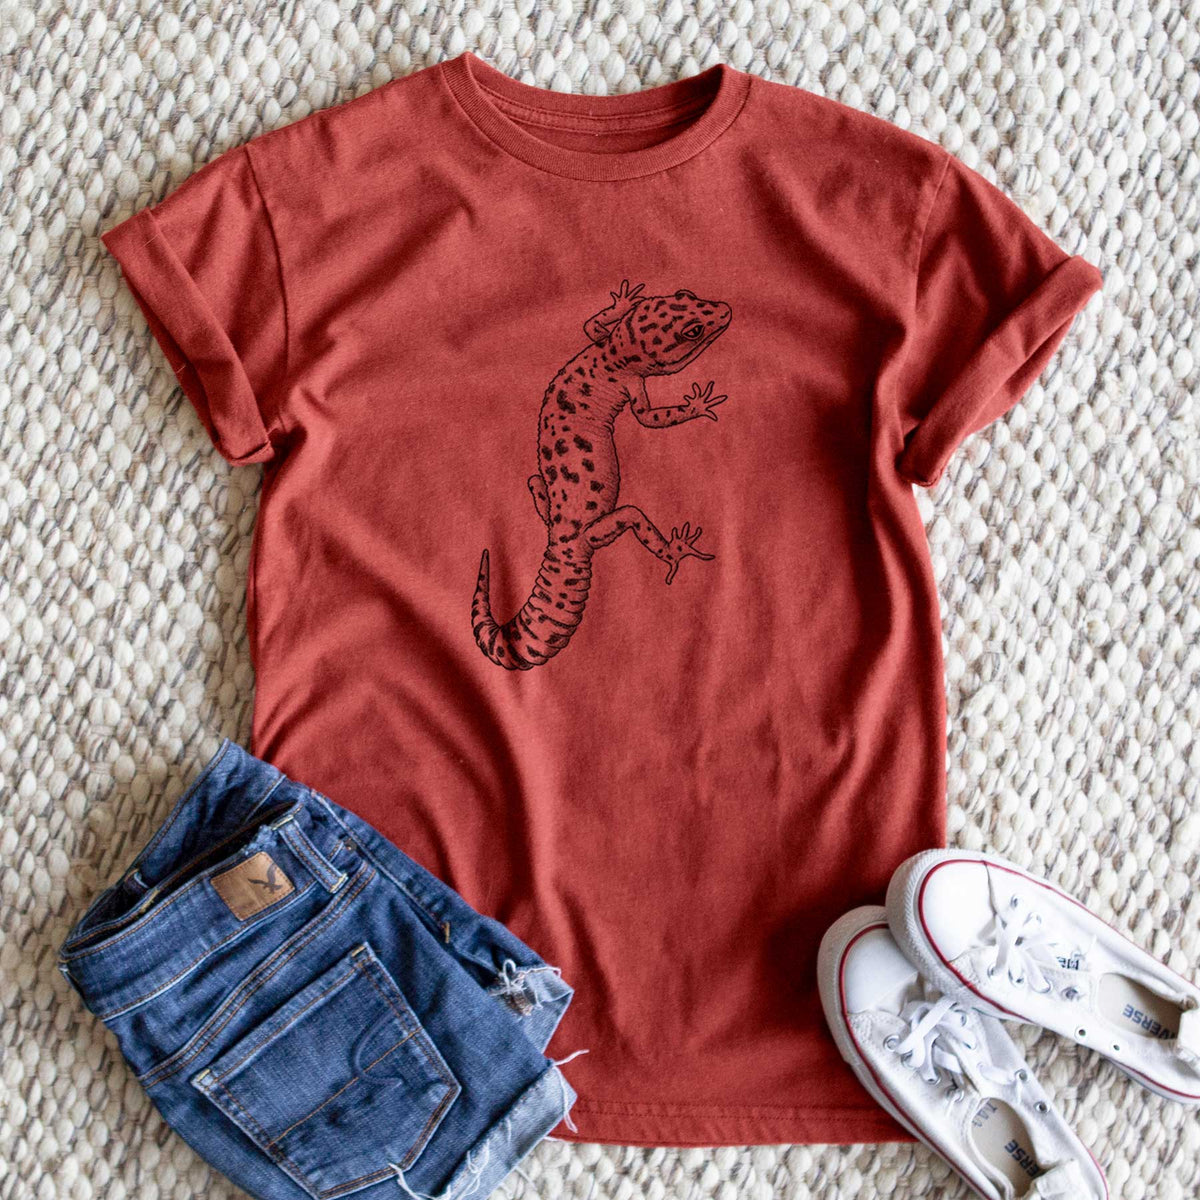 Eublepharis macularius - Leopard Gecko - Unisex Recycled Eco Tee  - CLOSEOUT - FINAL SALE